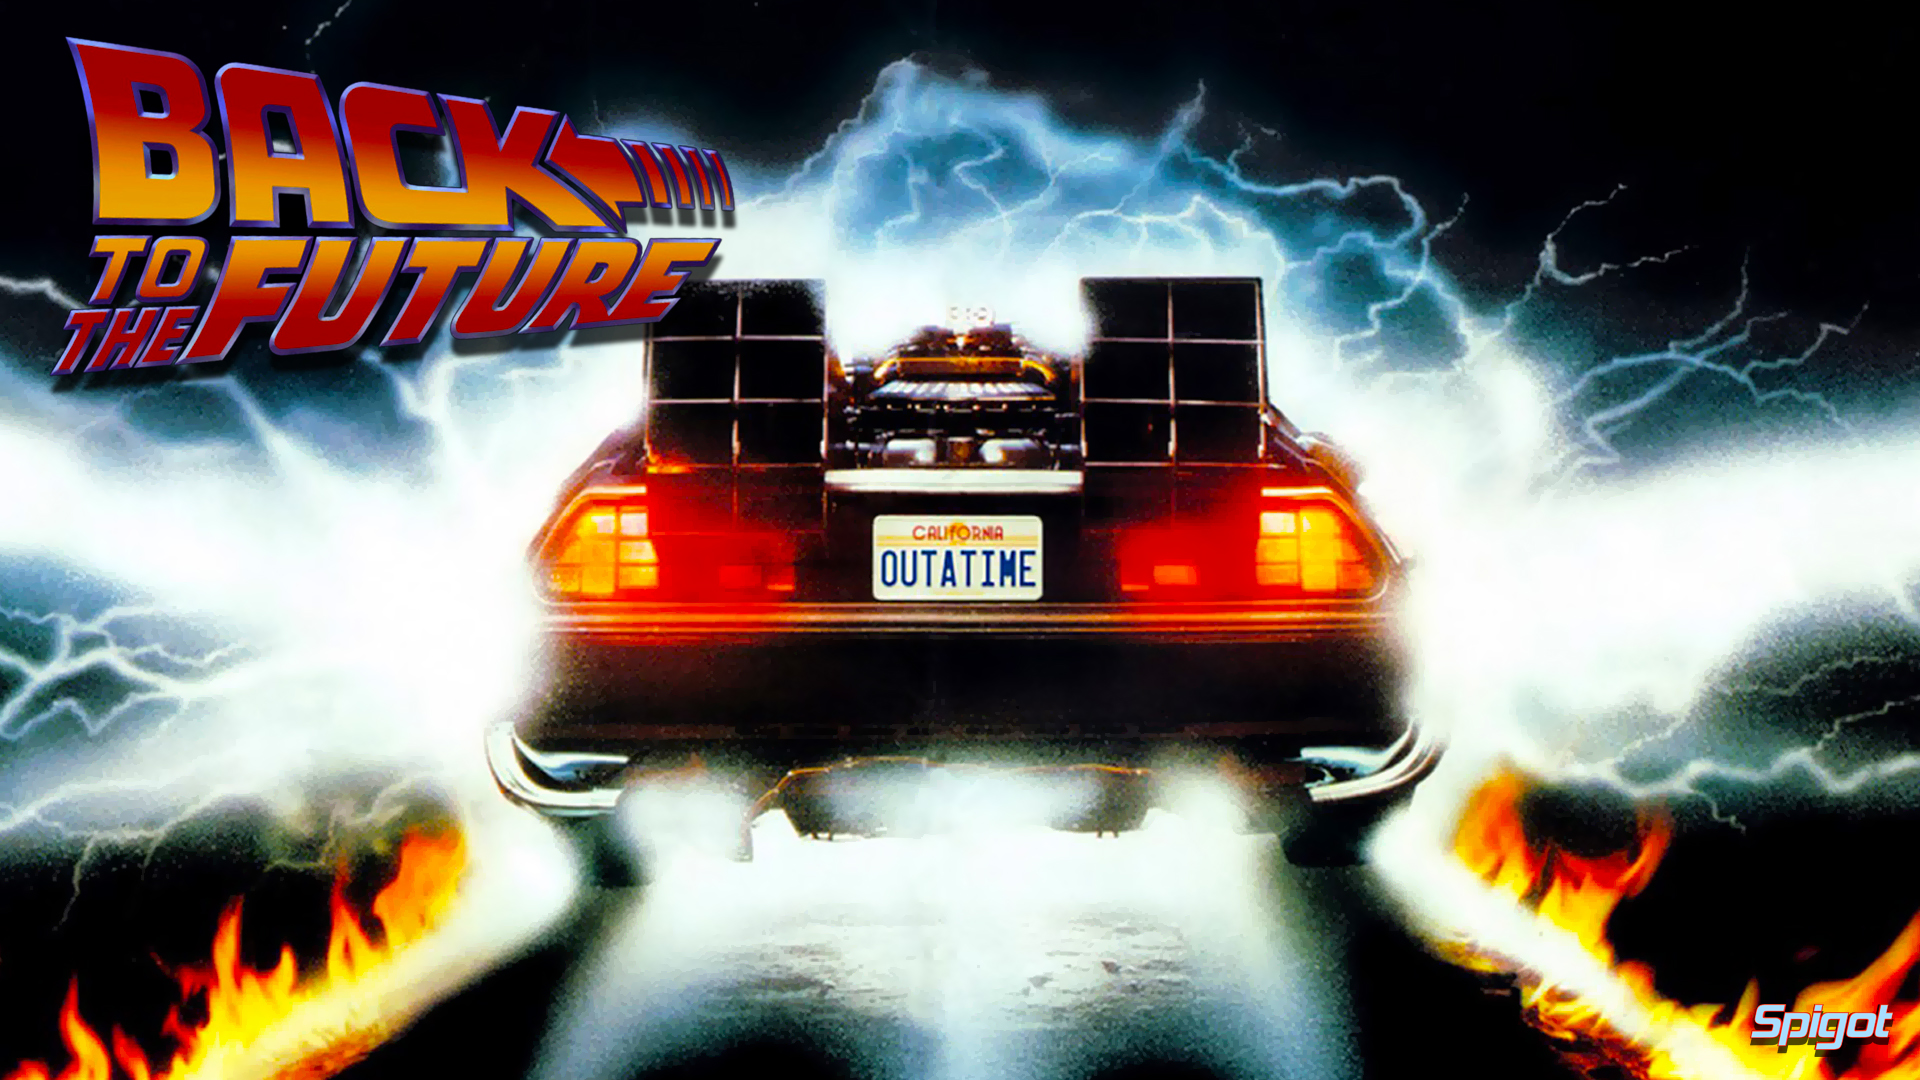 BACK TO THE FUTURE 30th Anniversary Blu-ray Steelbook is releasing exclusively from Target